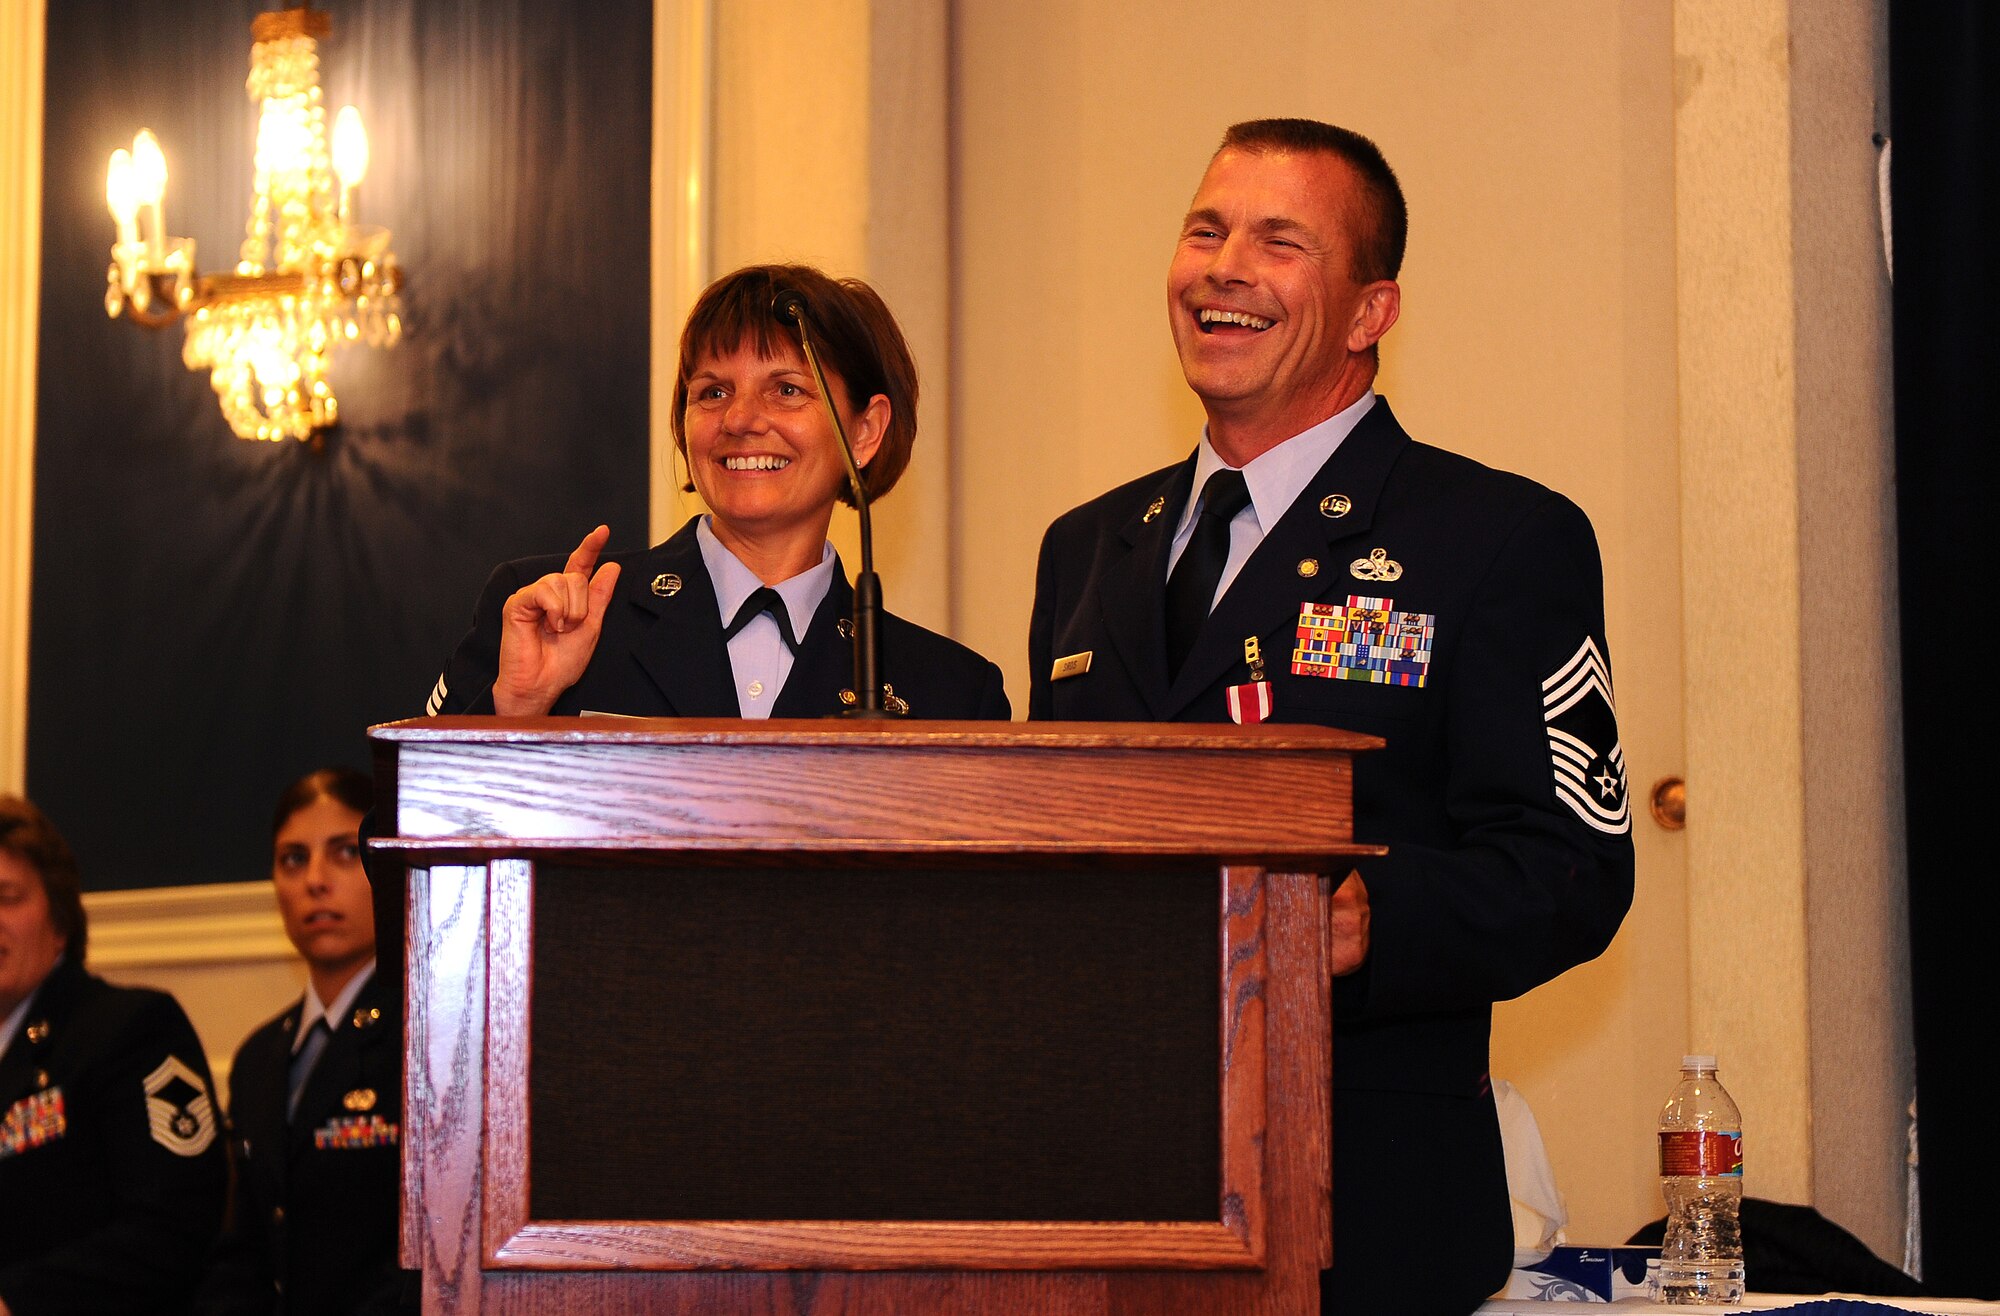 OFFUTT AIR FORCE BASE, Neb. - Command Chief Master Sgt. Lisa Sirois and her husband, Chief Master Sgt. Roger Sirois, are all smiles while they thank those in attendance at their dual retirement ceremony at the Patriot Club, July 6.  With over 60 years of combined service, Chiefs Lisa and Roger Sirois' retirement ceremony symbolized both a commitment to the service of this country as well as one another.
U.S. Air Force Photo by Josh Plueger
